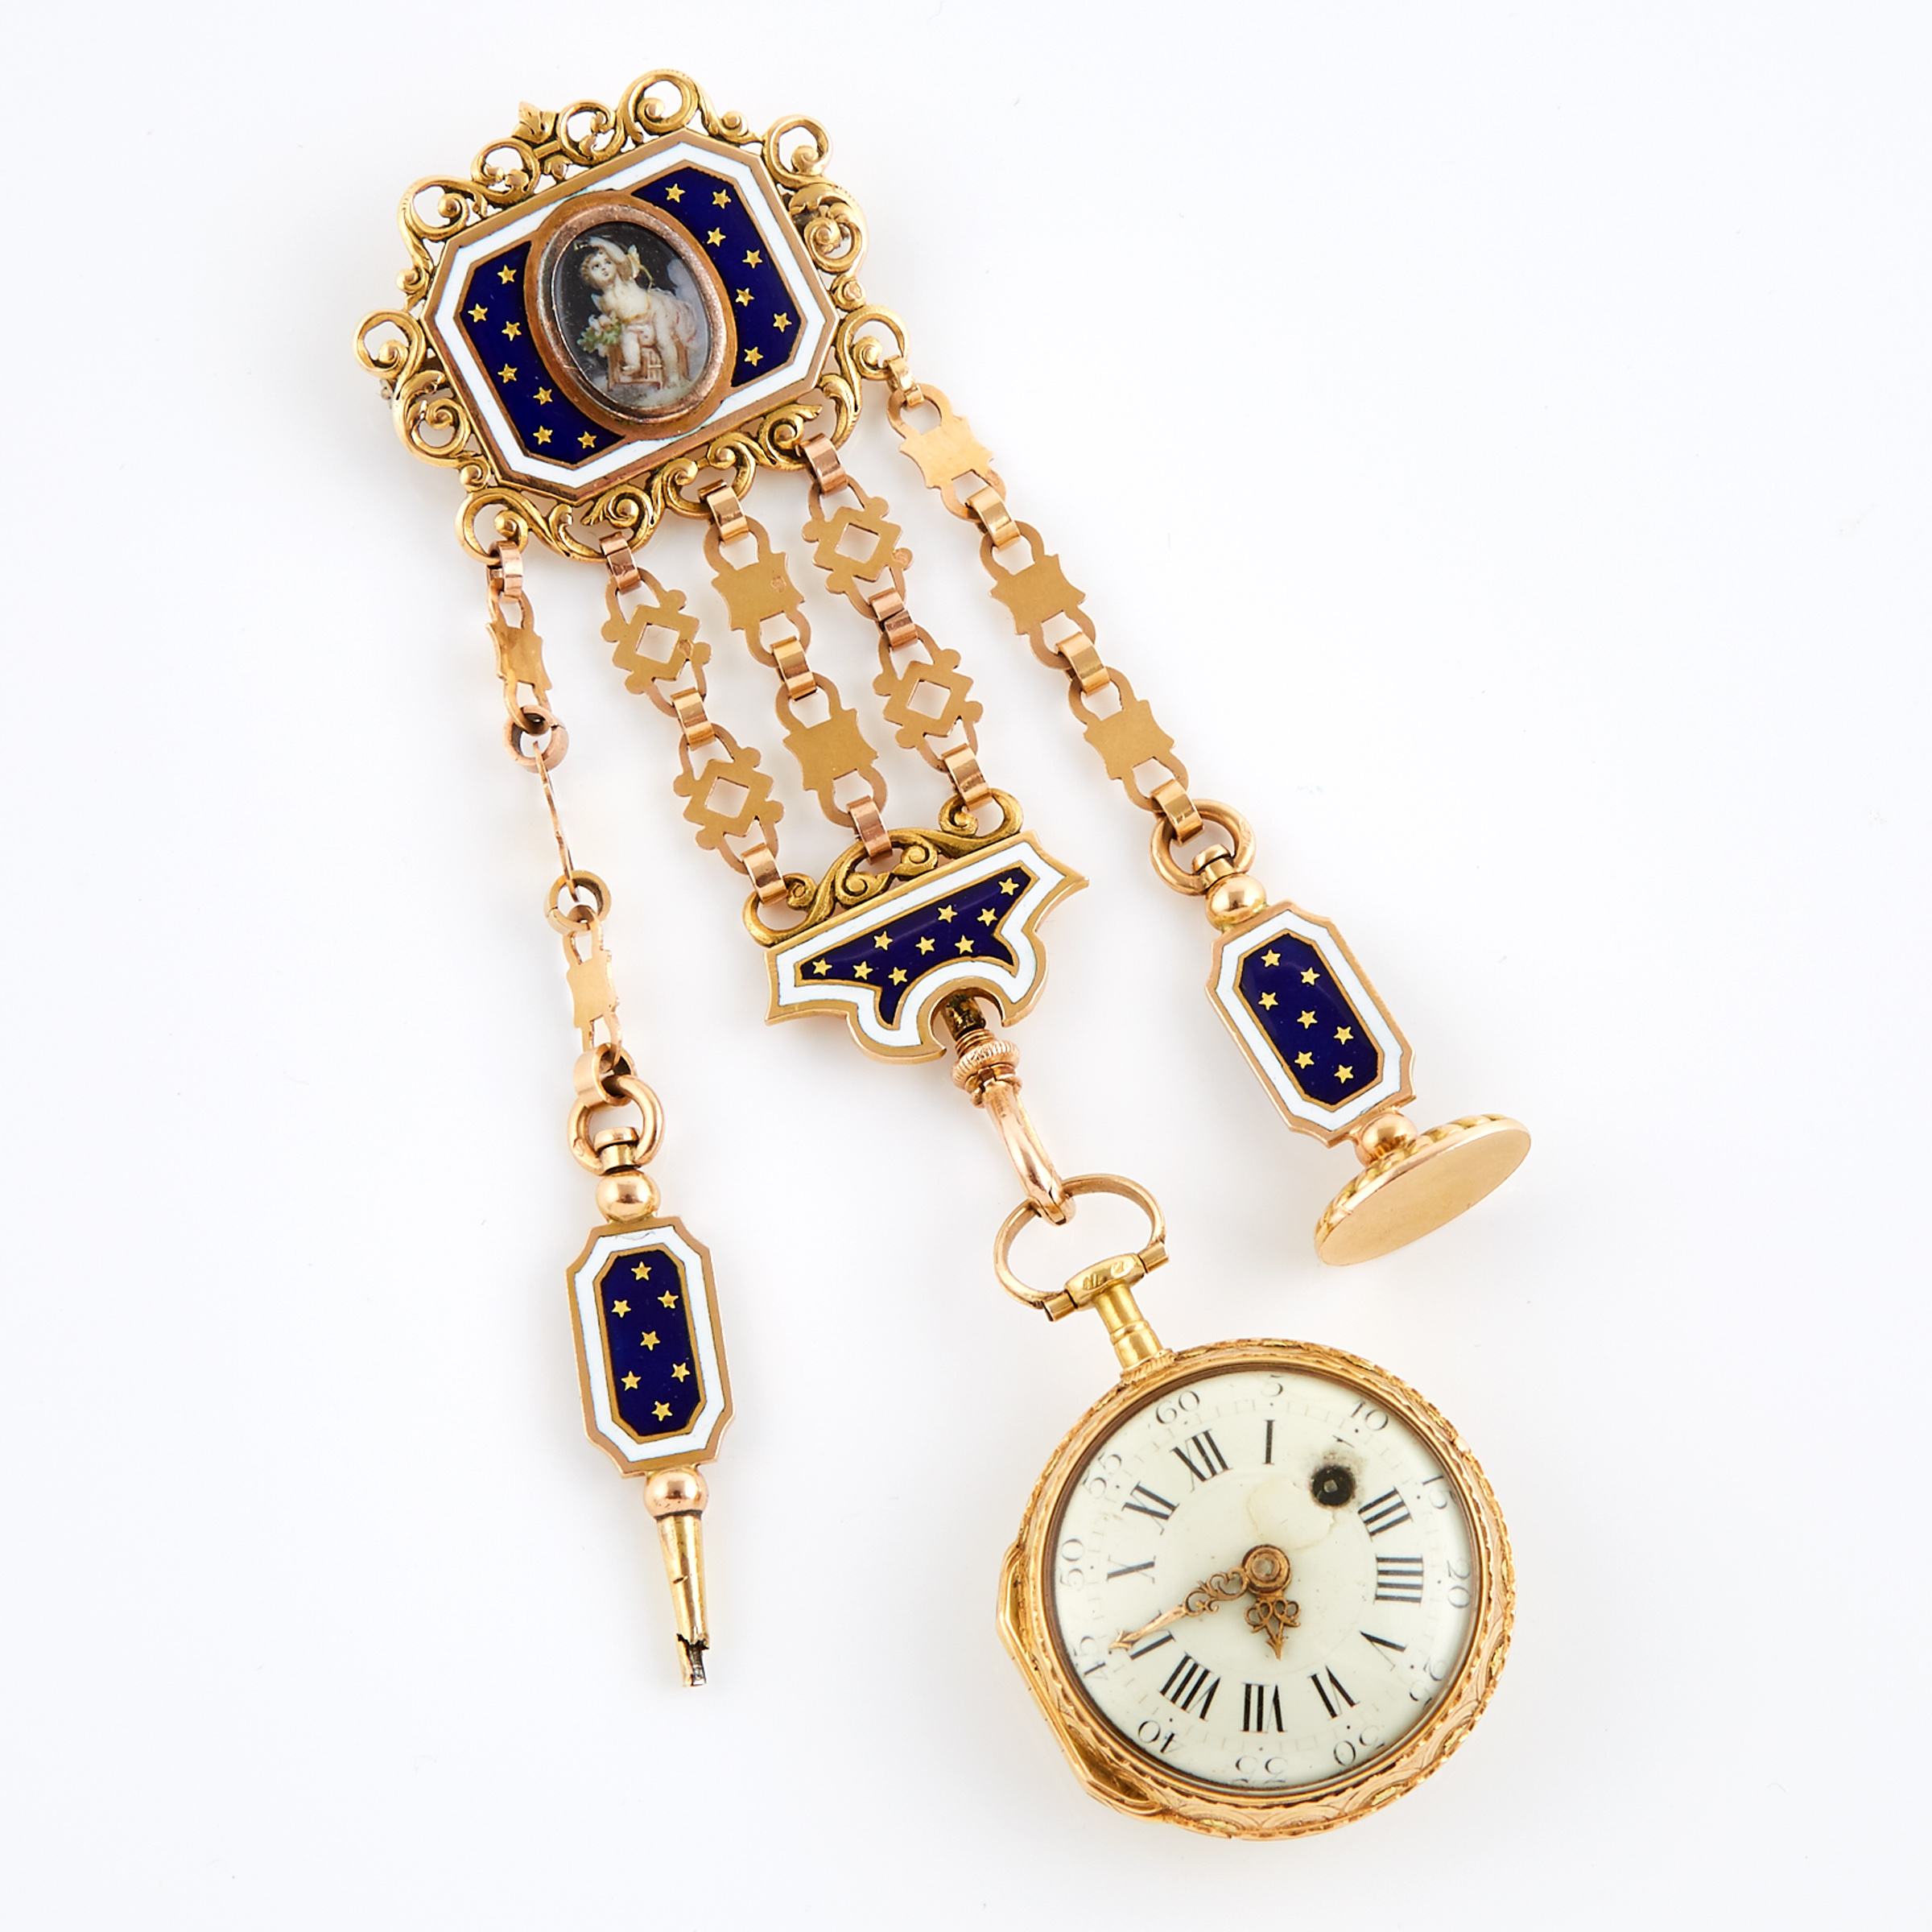 Romilly Of Paris Key Wind, Openface Fob Watch And Chatelaine